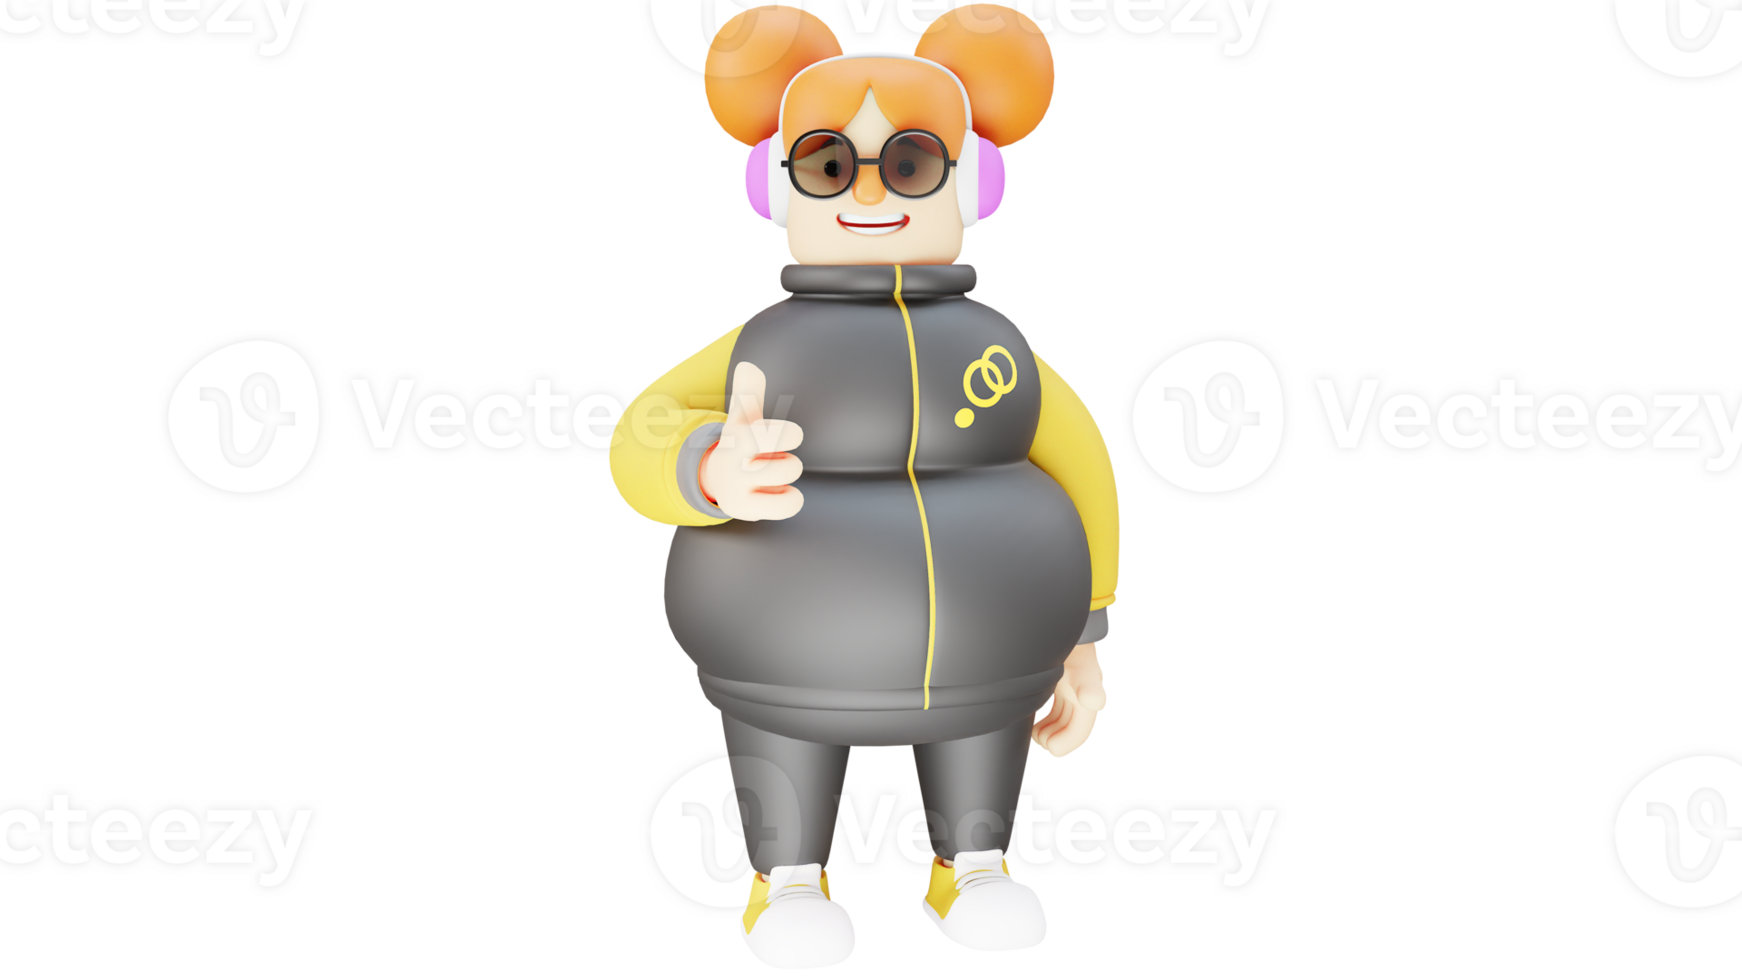 3D illustration. Fat Girl 3D Cartoon Character. Cute girl wearing pink headphones. Girl wearing a gray jacket. Smiling girl while giving a thumbs up sign. 3D cartoon character png